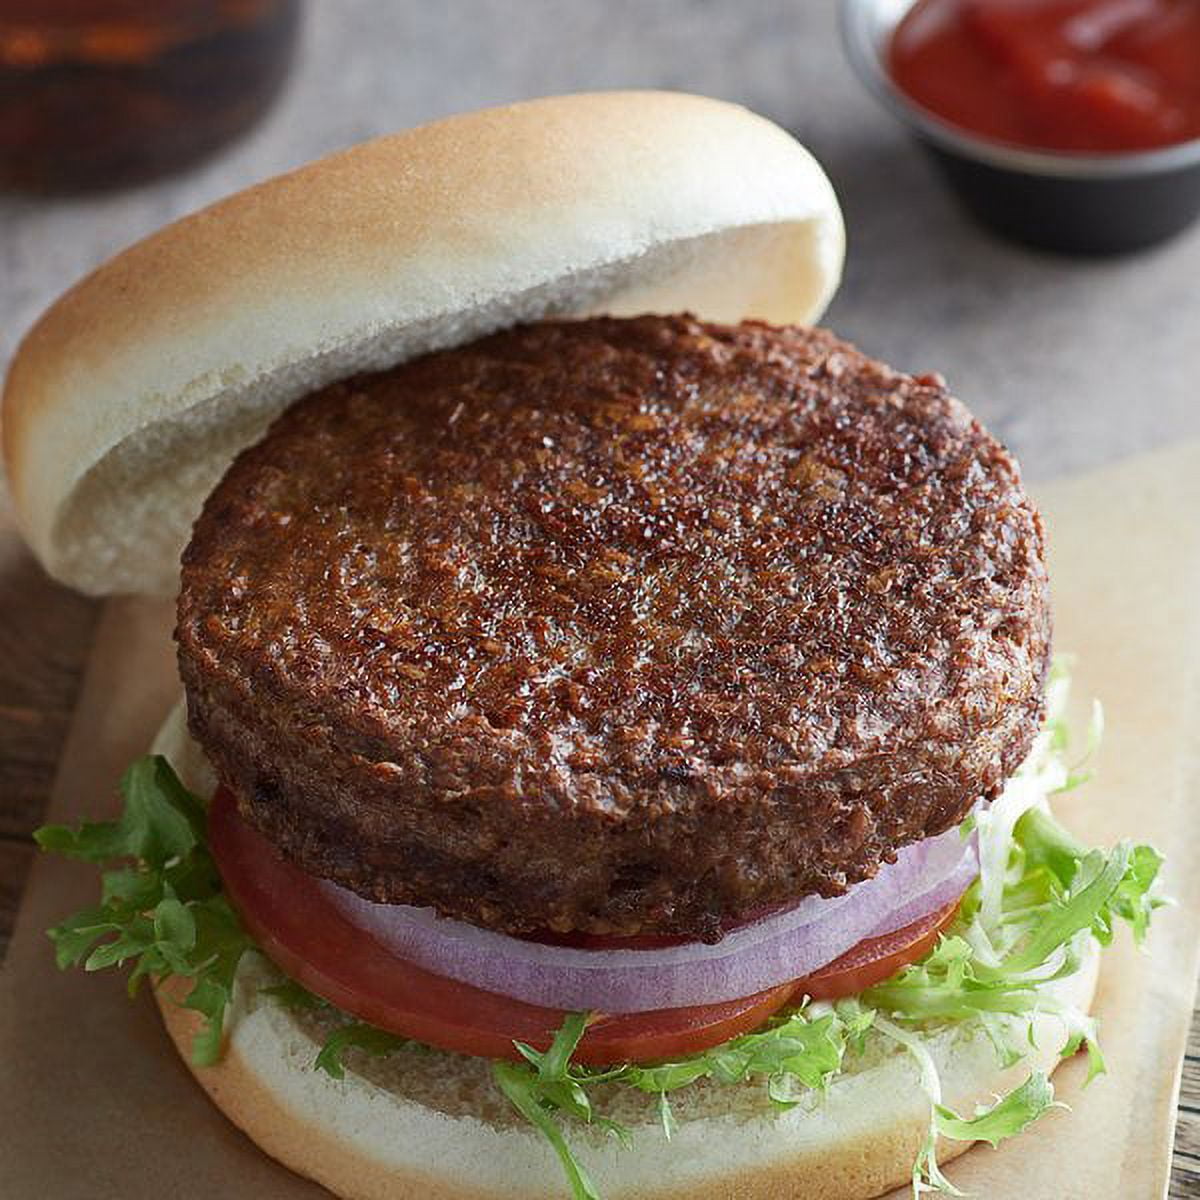 Beyond Meat Burger 6pack 678g Shipped to Nunavut – The Northern Shopper